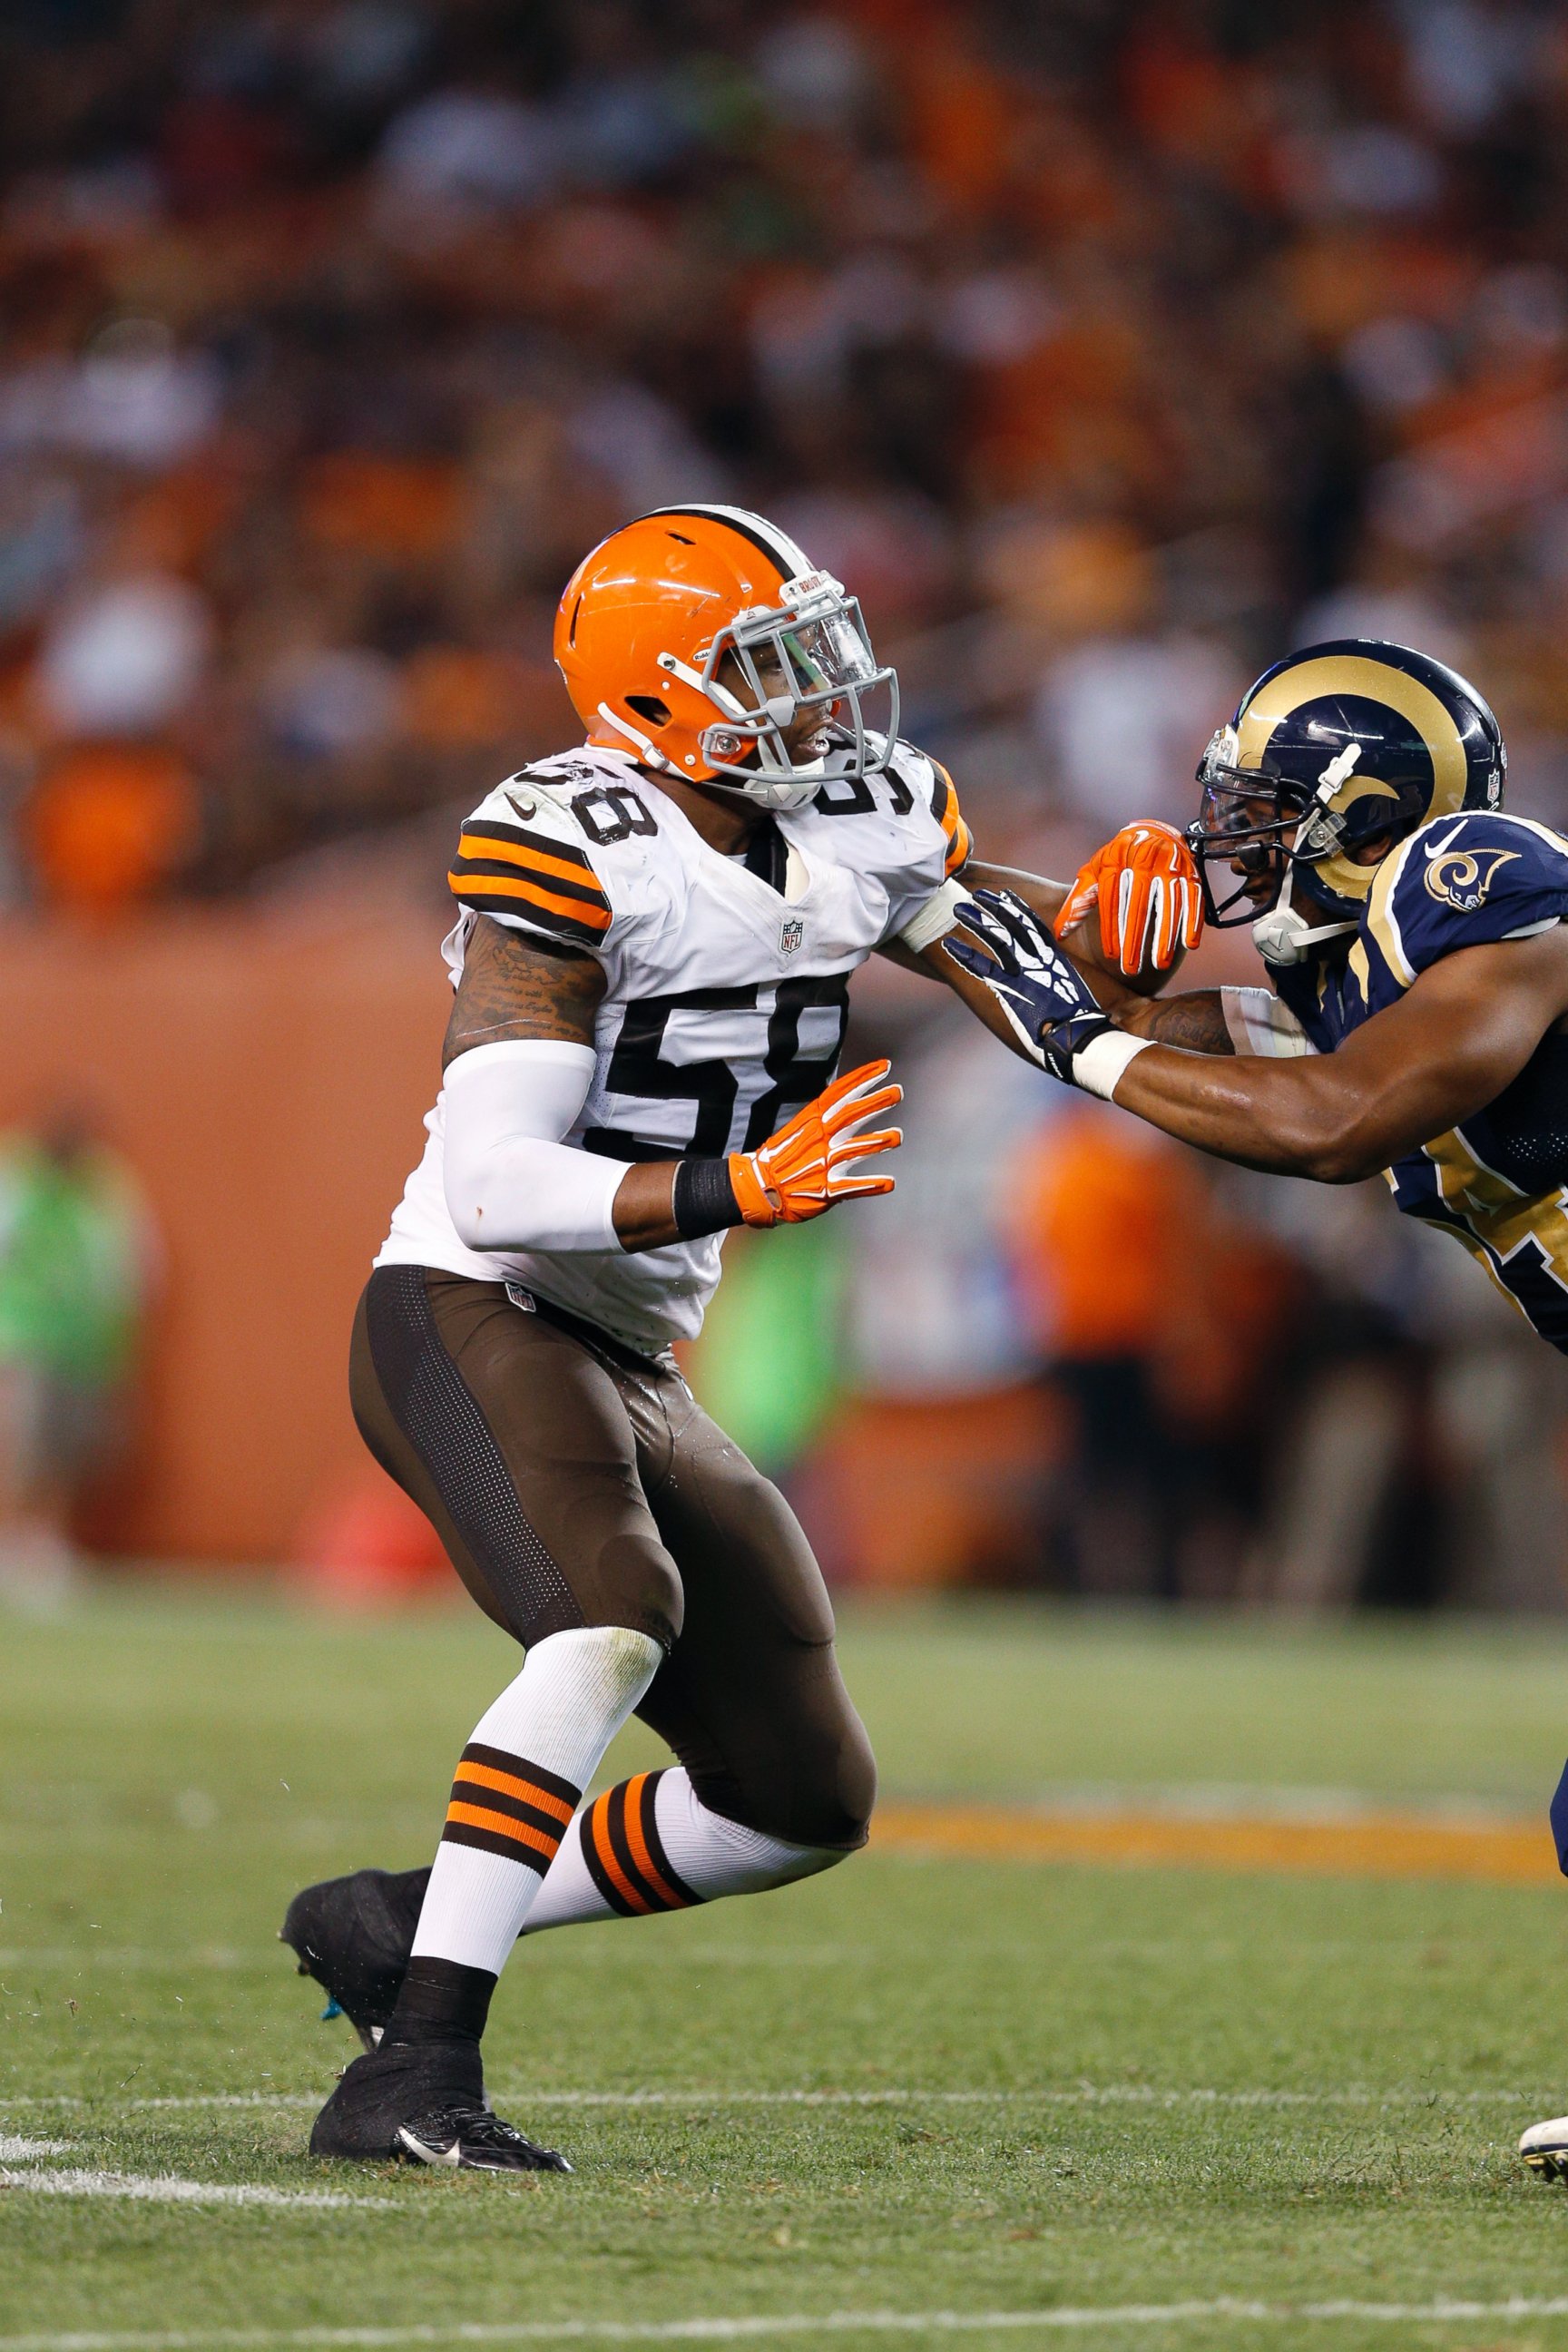 PHOTO: Christian Kirksey, #58 of the Cleveland Browns, in action during an NFL preseason game against the St. Louis Rams at FirstEnergy Stadium, Aug. 23, 2014, in Cleveland.